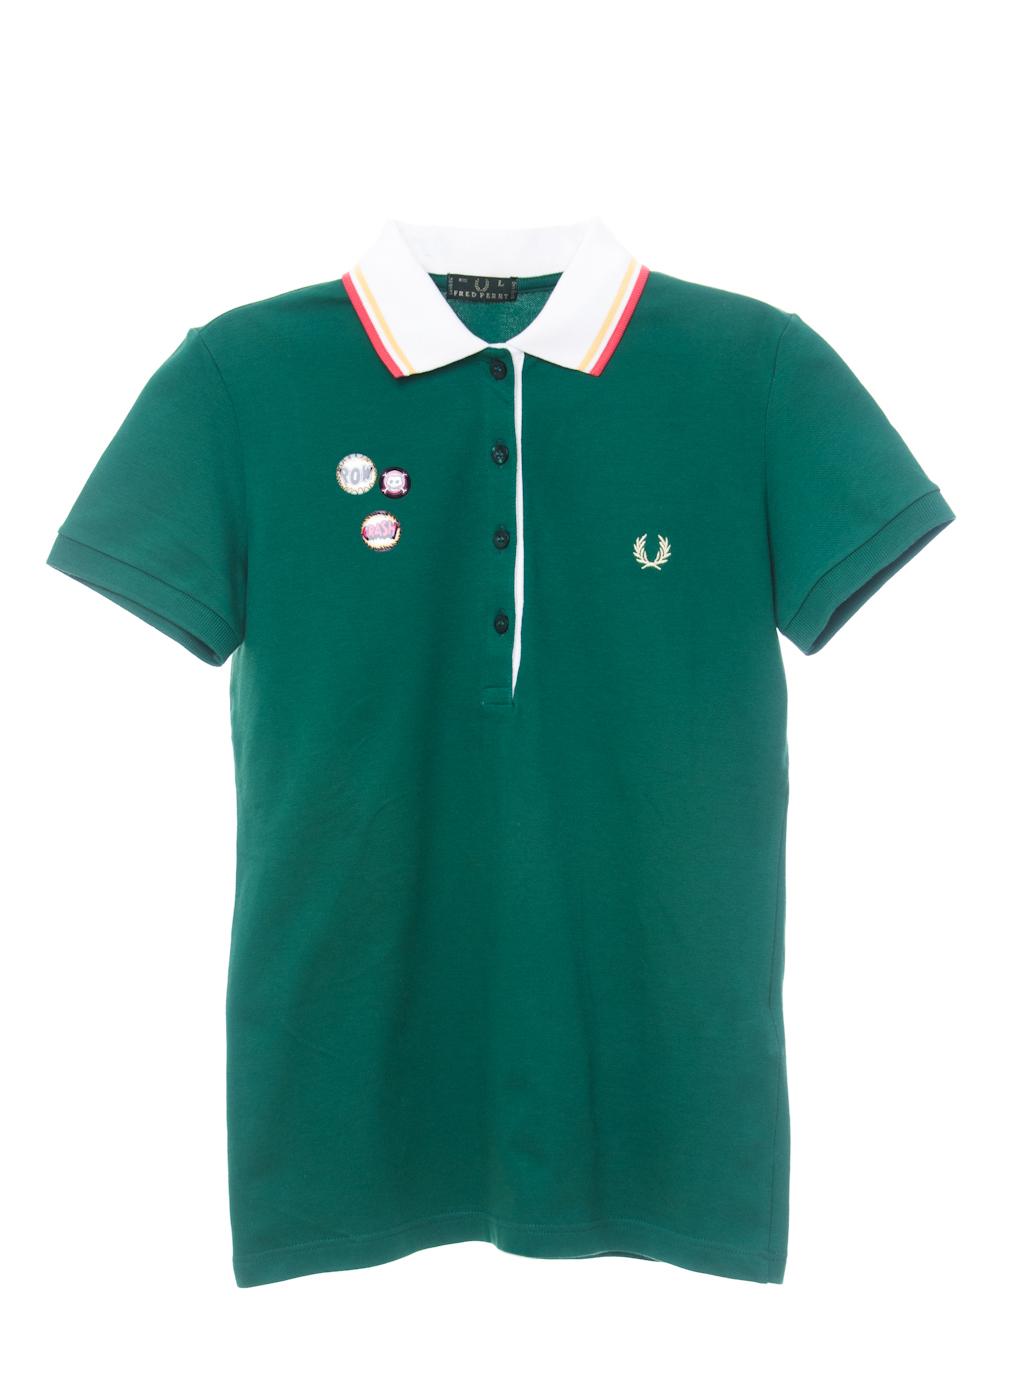 Foto Polo Fred Perry Pins foto 172417